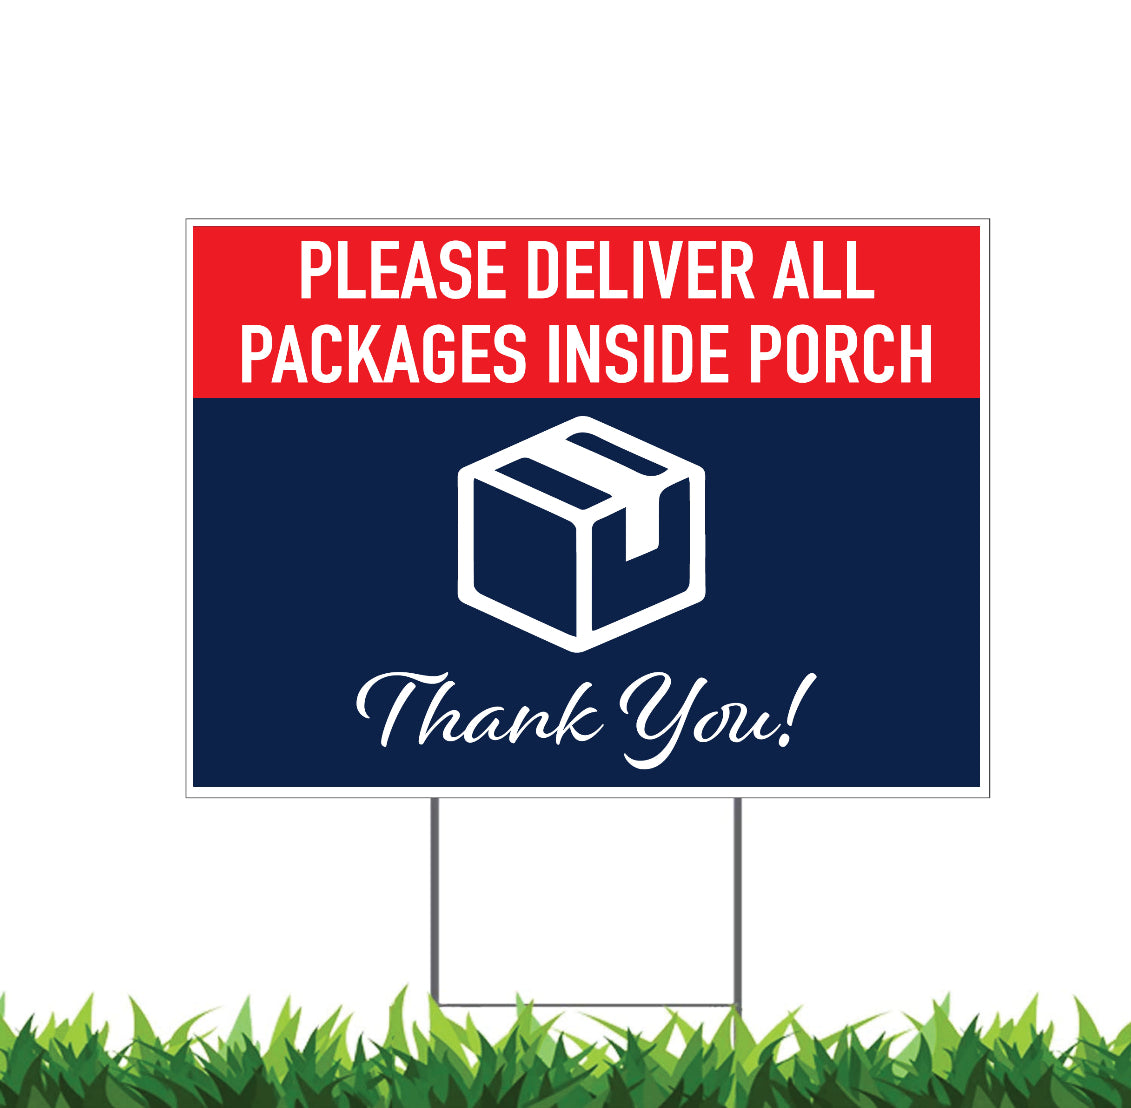 Deliver Packages Inside Porch, Yard Sign, 18x12, 24x18, 36x24, H-Stake Included